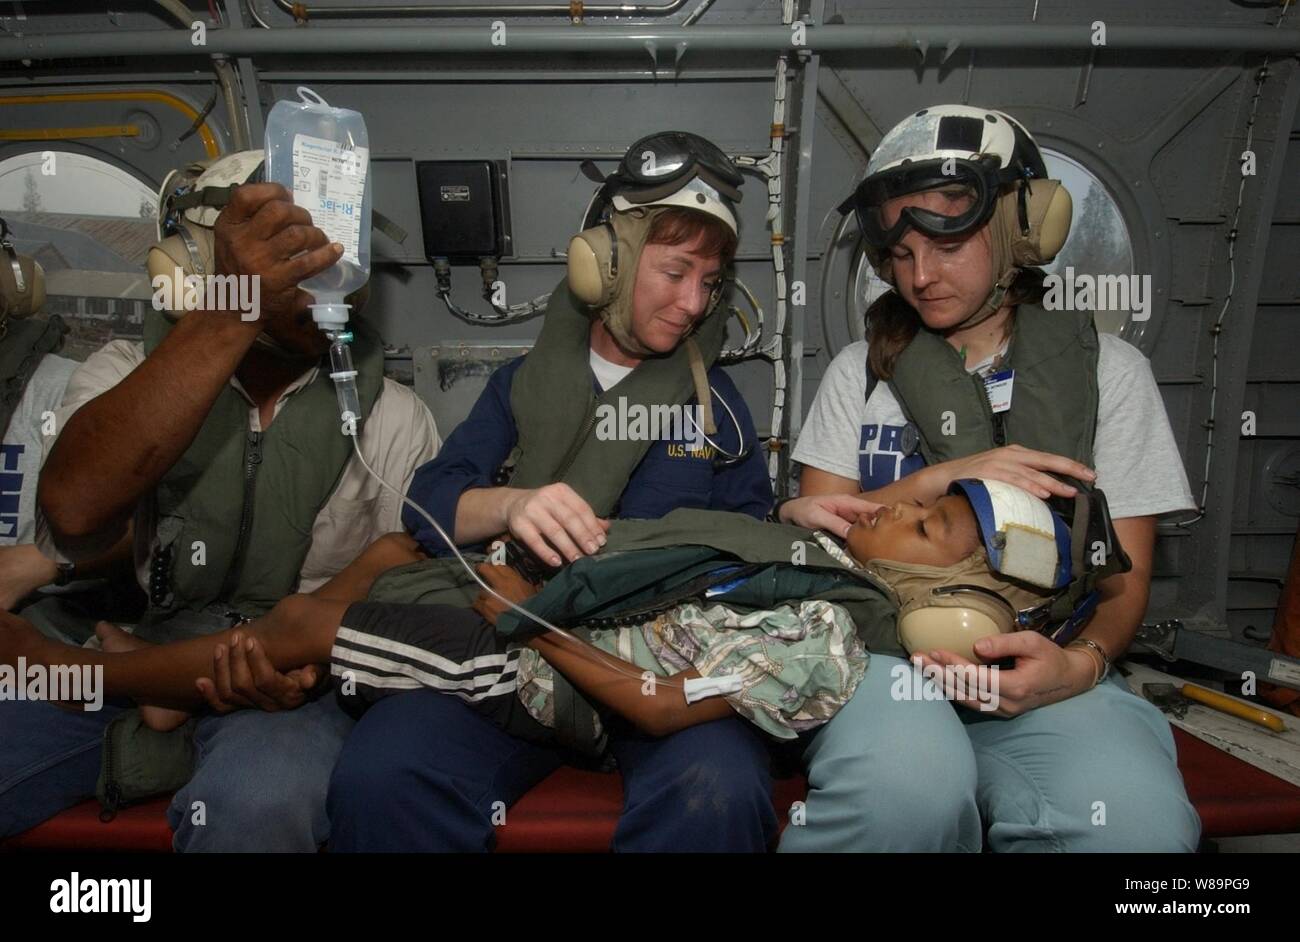 U.S. Navy Nurse Cmdr. Karen McDonald (center) and a nurse from the organization Project HOPE (right) comfort a young boy suffering from a perforated appendix aboard a U.S. helicopter in Sumatra, Indonesia, on Feb. 6, 2005. The boy and his father (left) are being transported to the hospital ship USNS Mercy (T-AH 19) for medical attention.  Mercy is currently off the coast of Banda Aceh, Sumatra, Indonesia, to provide medical assistance and disaster relief to the people of Indonesia affected by the devastating tsunami that hit Southeast Asia on Dec. 26, 2004. McDonald is the Mercy's assistant di Stock Photo